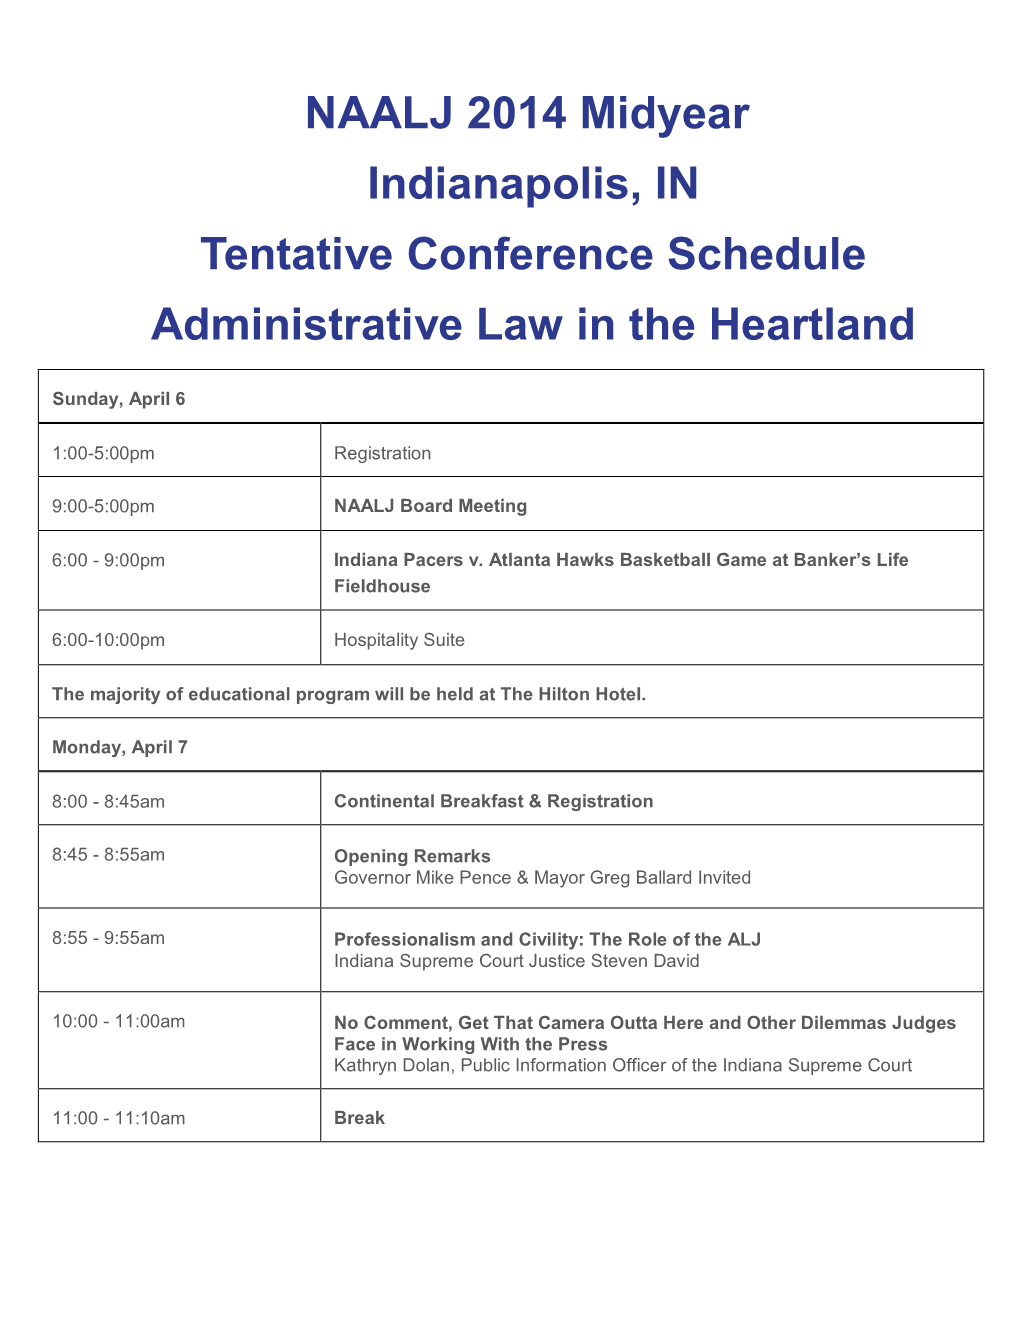 NAALJ 2014 Midyear Indianapolis, in Tentative Conference Schedule Administrative Law in the Heartland